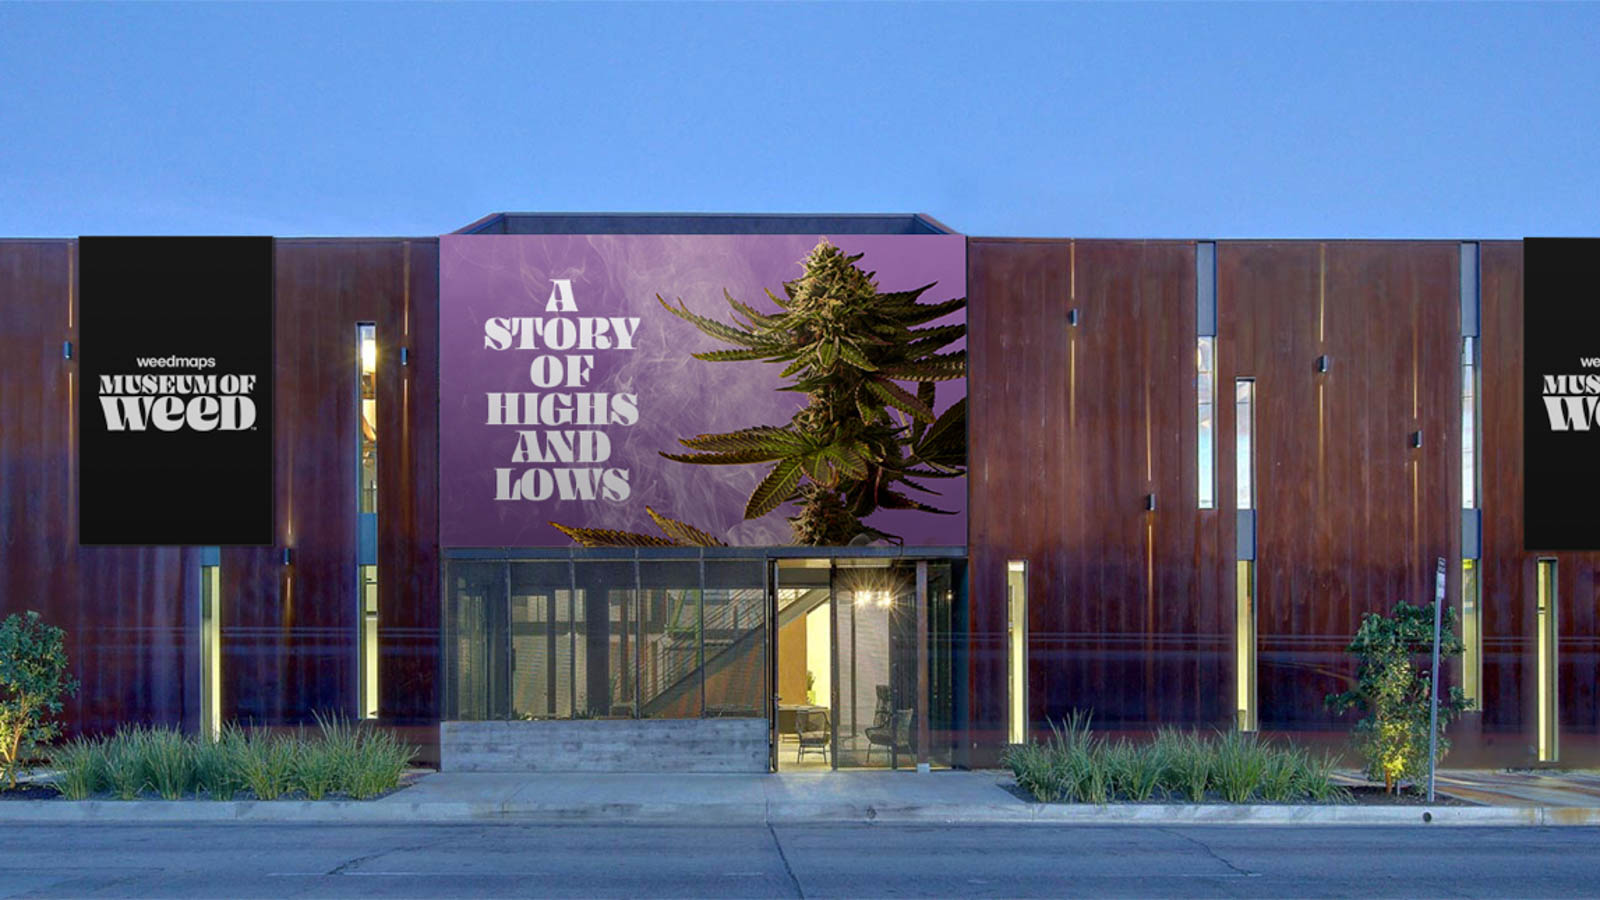 Tech Company Weedmaps to Debut 30,000 Square Foot Cannabis Museum in Hollywood